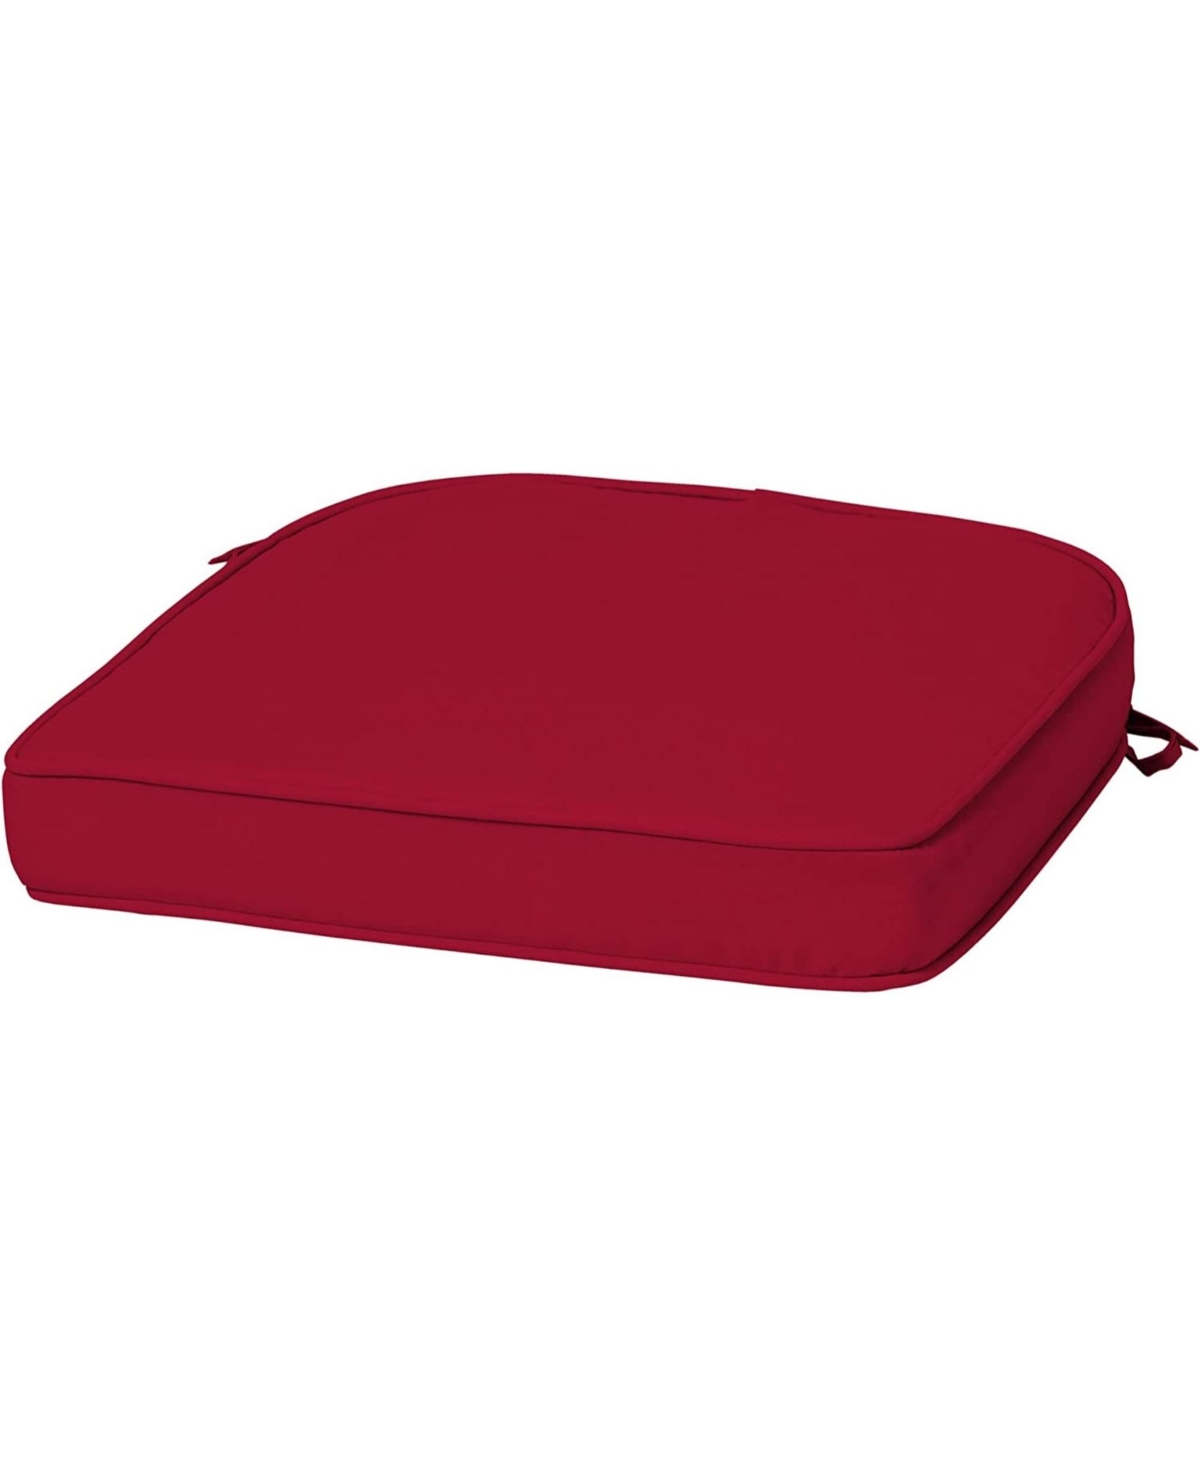 ProFoam Rounded Back Outdoor Patio Cushion Red - Red